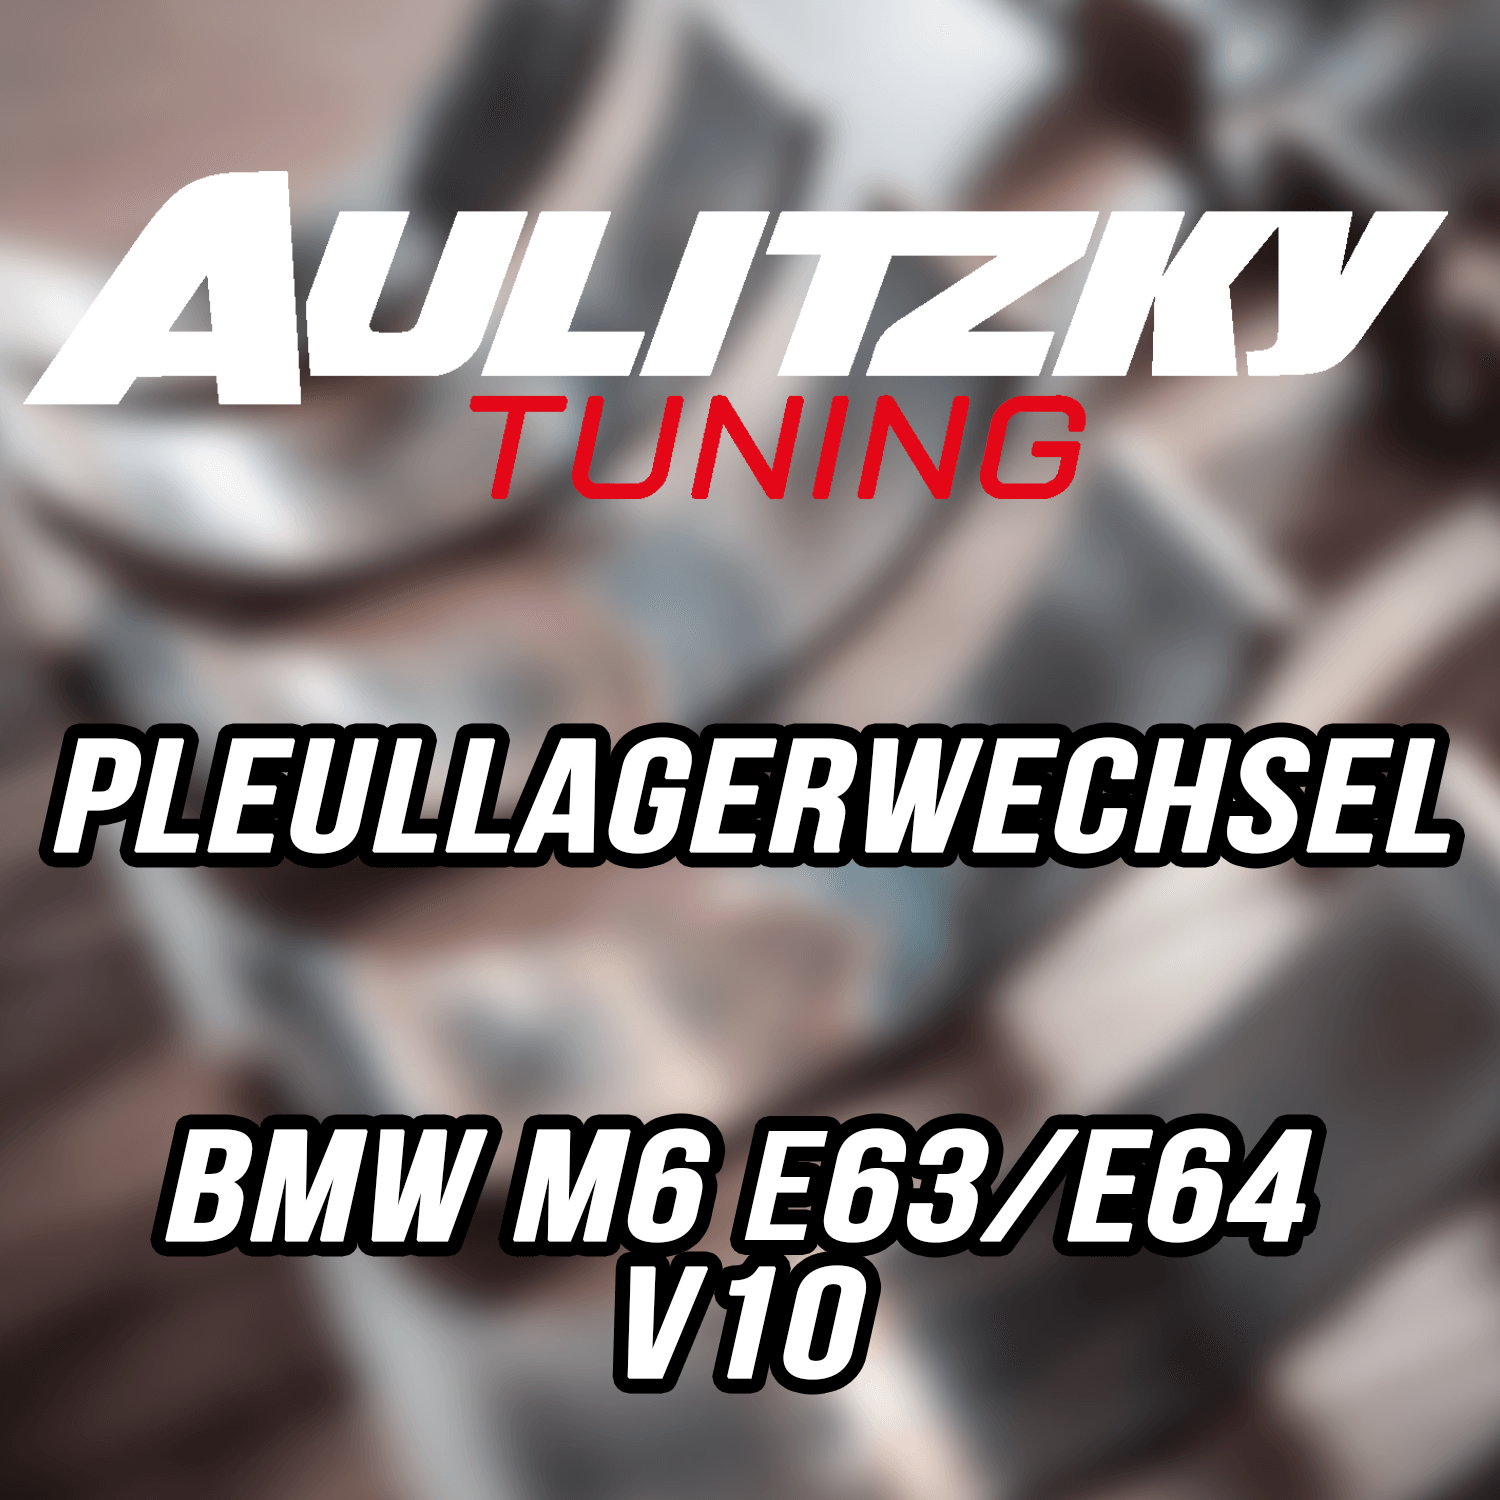 Aulitzky Tuning | Pleuellagerwechsel | BMW M6 (E63/E64) 507PS S85